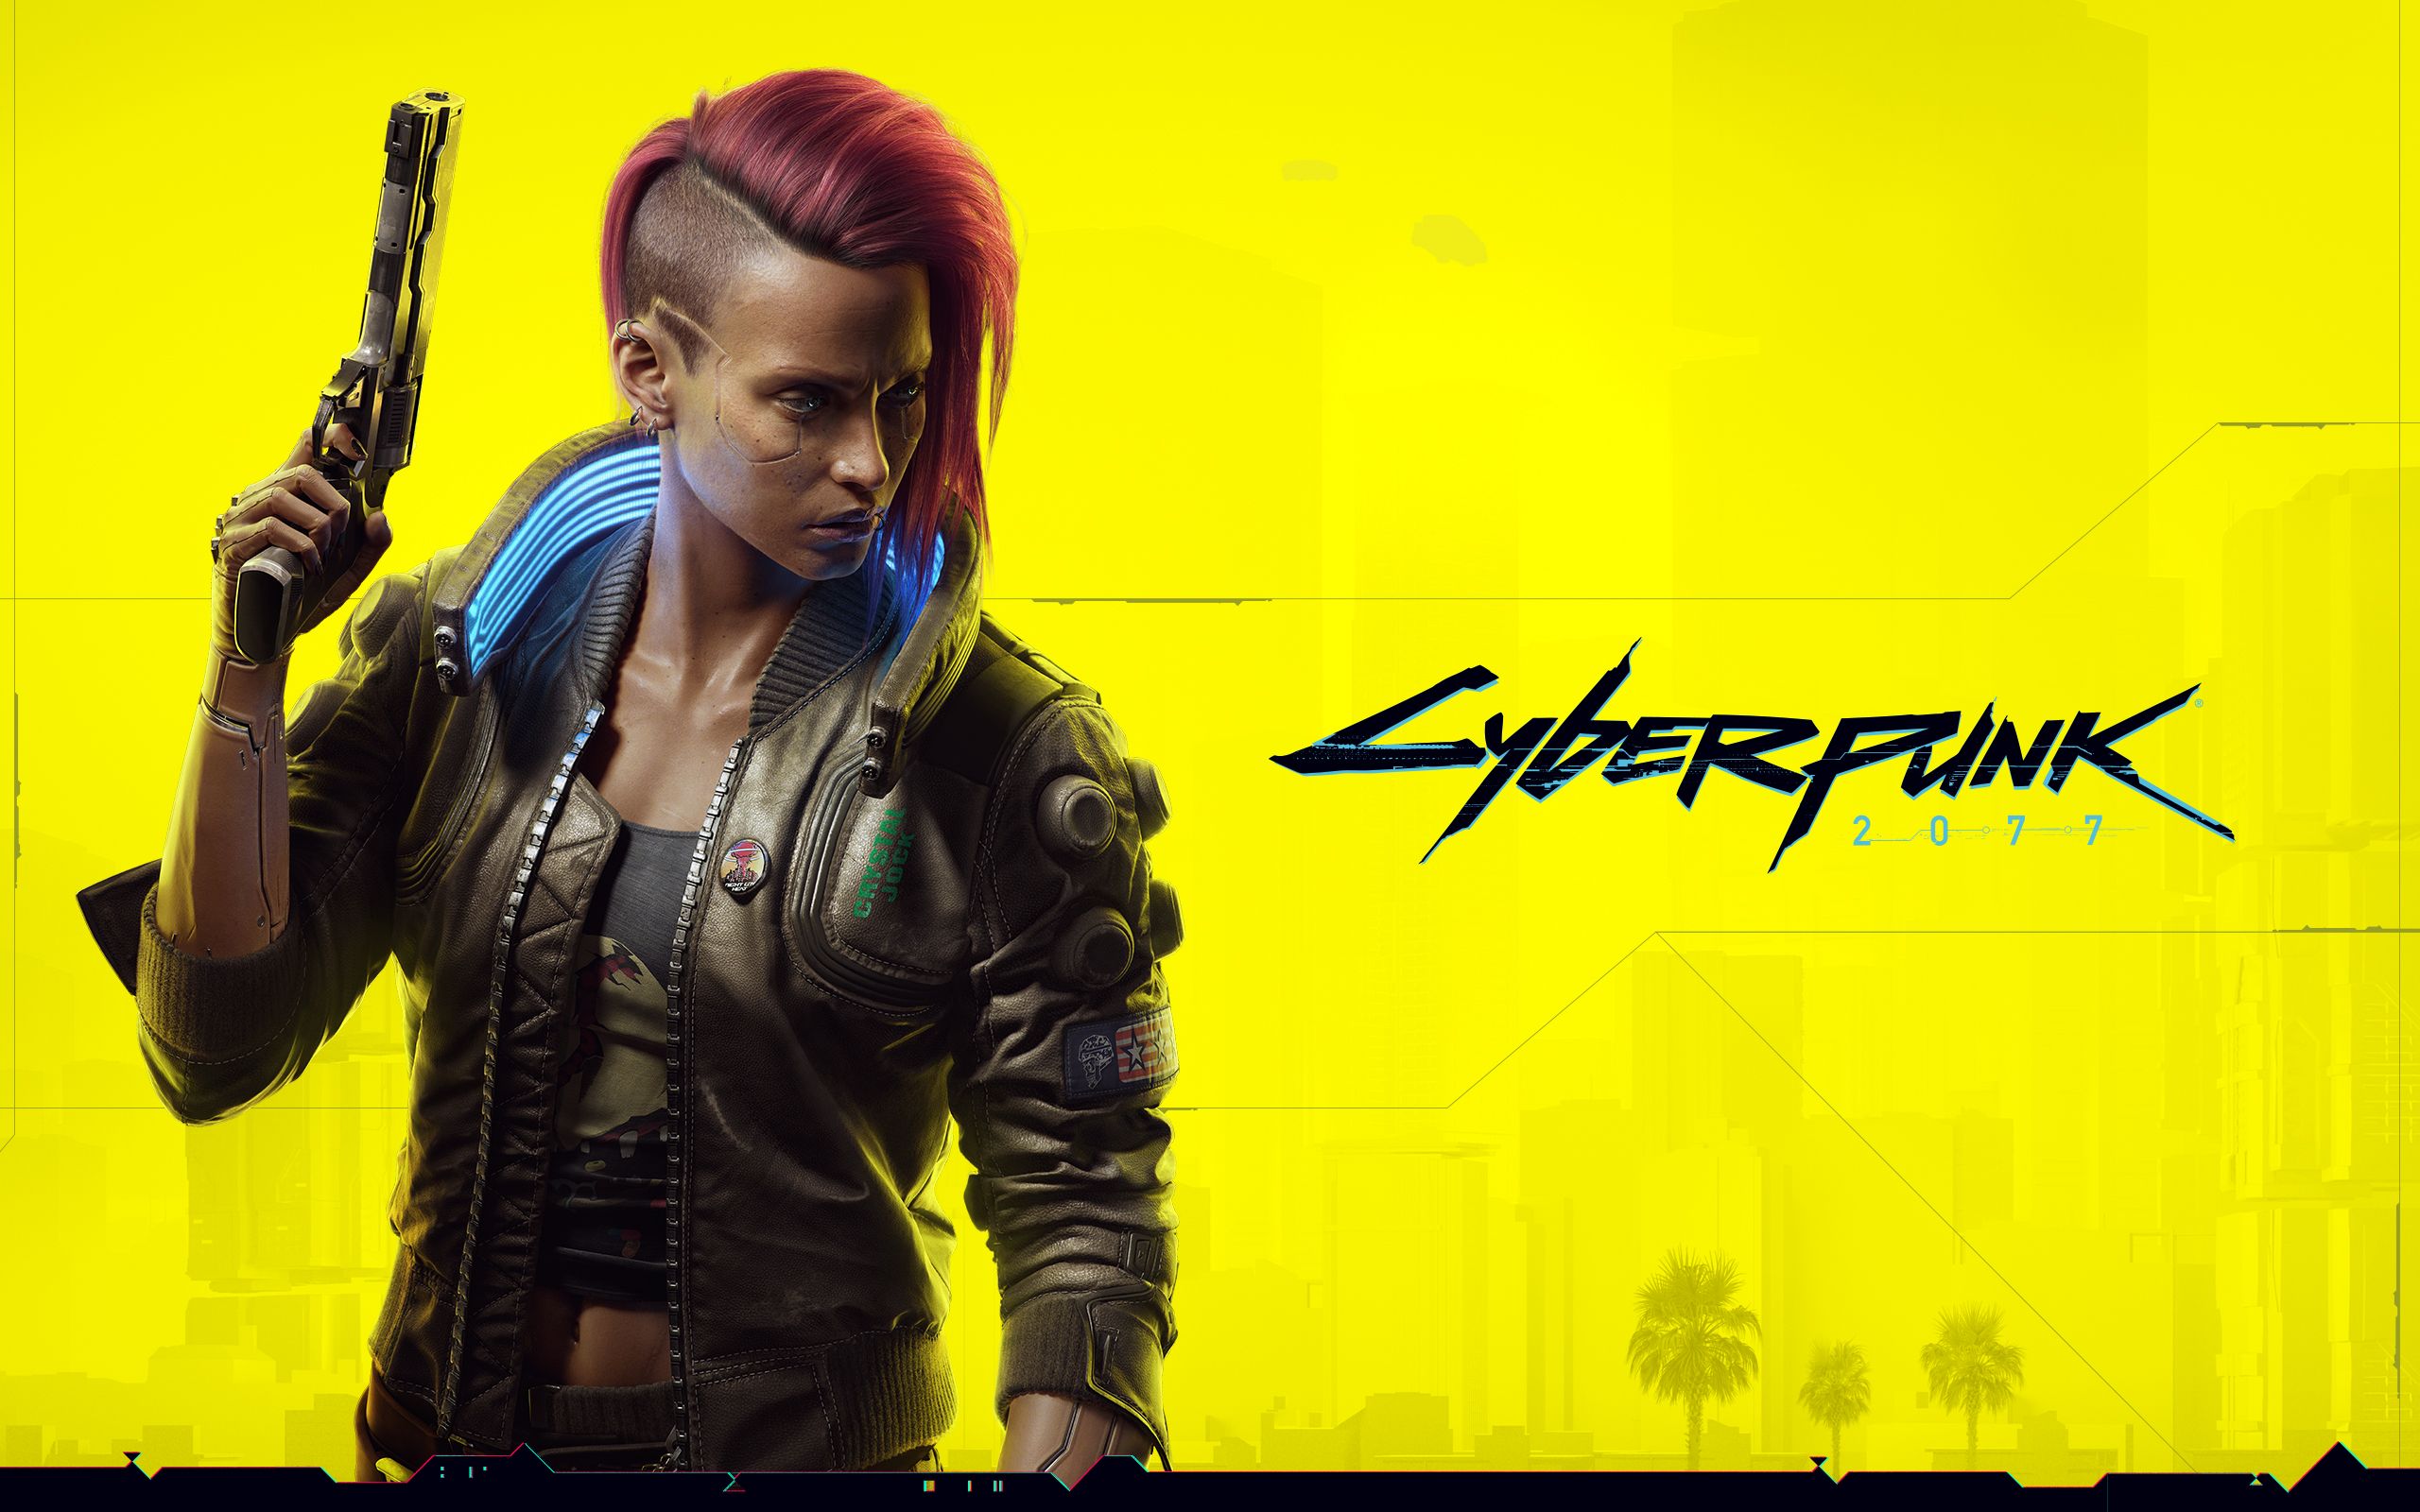 Wallpaper of Video Game, Cyberpunk Poster background & HD image